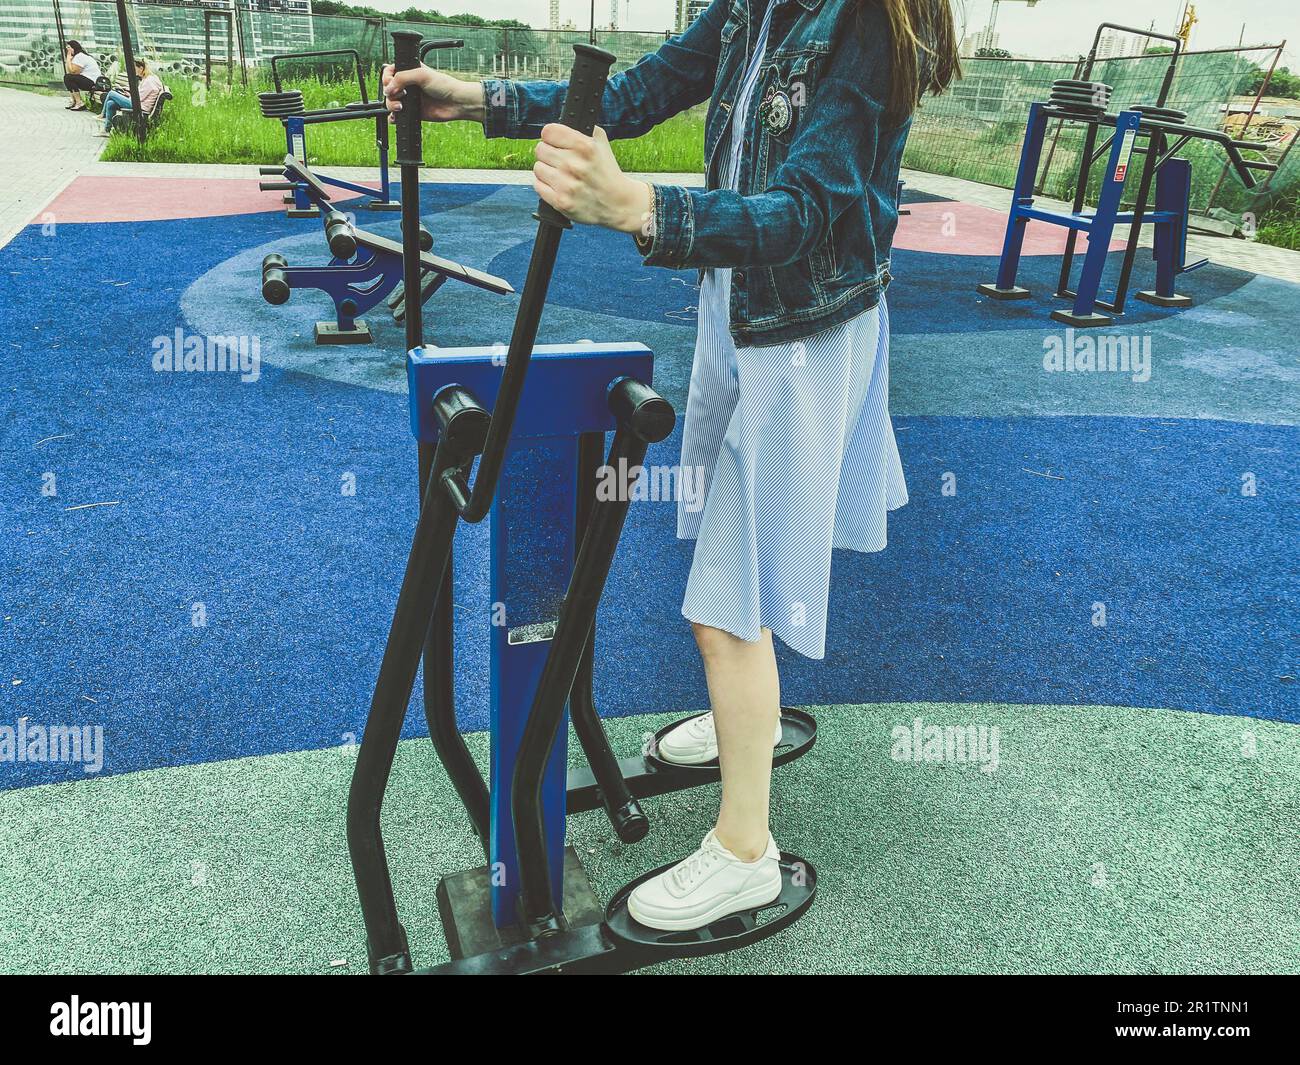 outdoor sports. playground with exercise equipment in the park. a